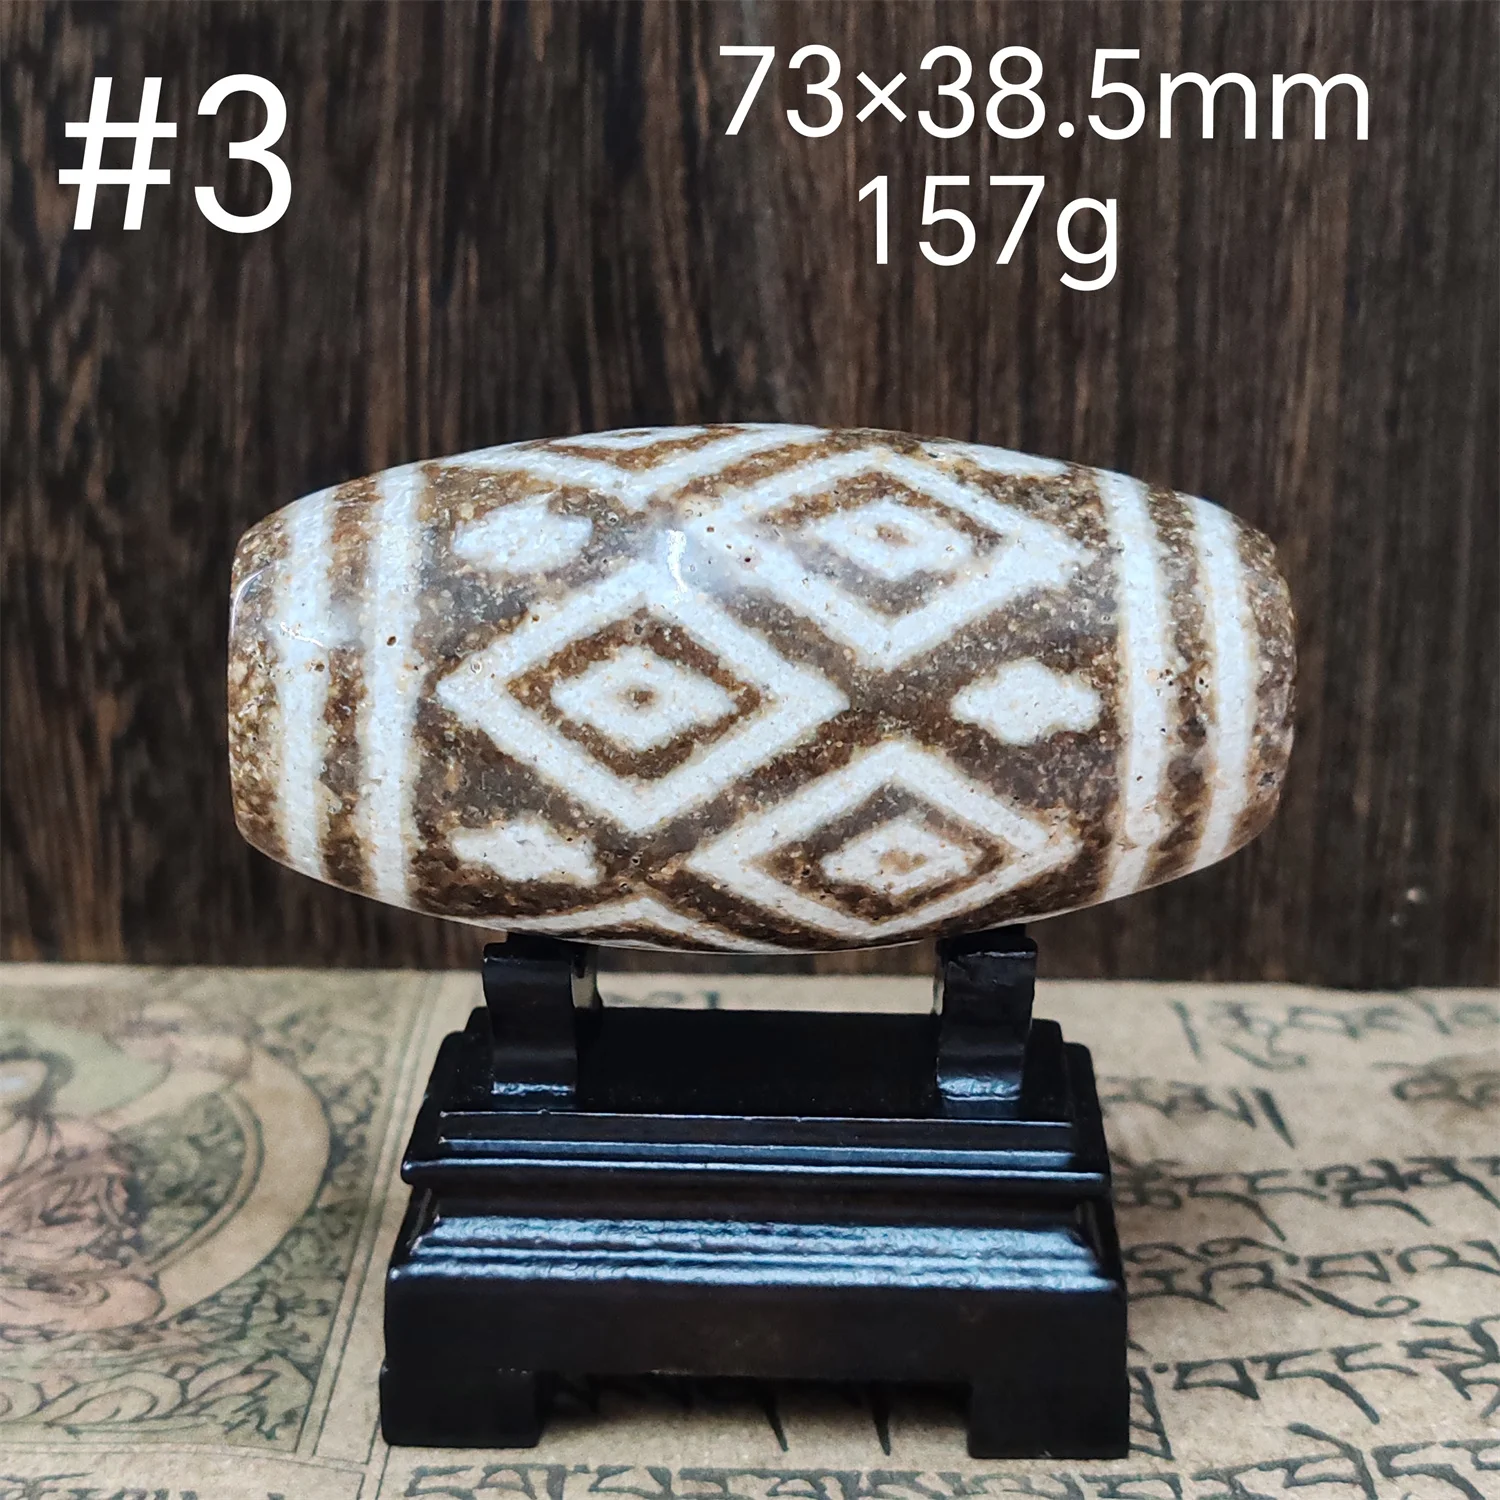 

1pcs/lot Natural Agate Xiangxiong Dzi Multi-eye pattern ancient totems as ornaments Lengthened and thickened should not be worn